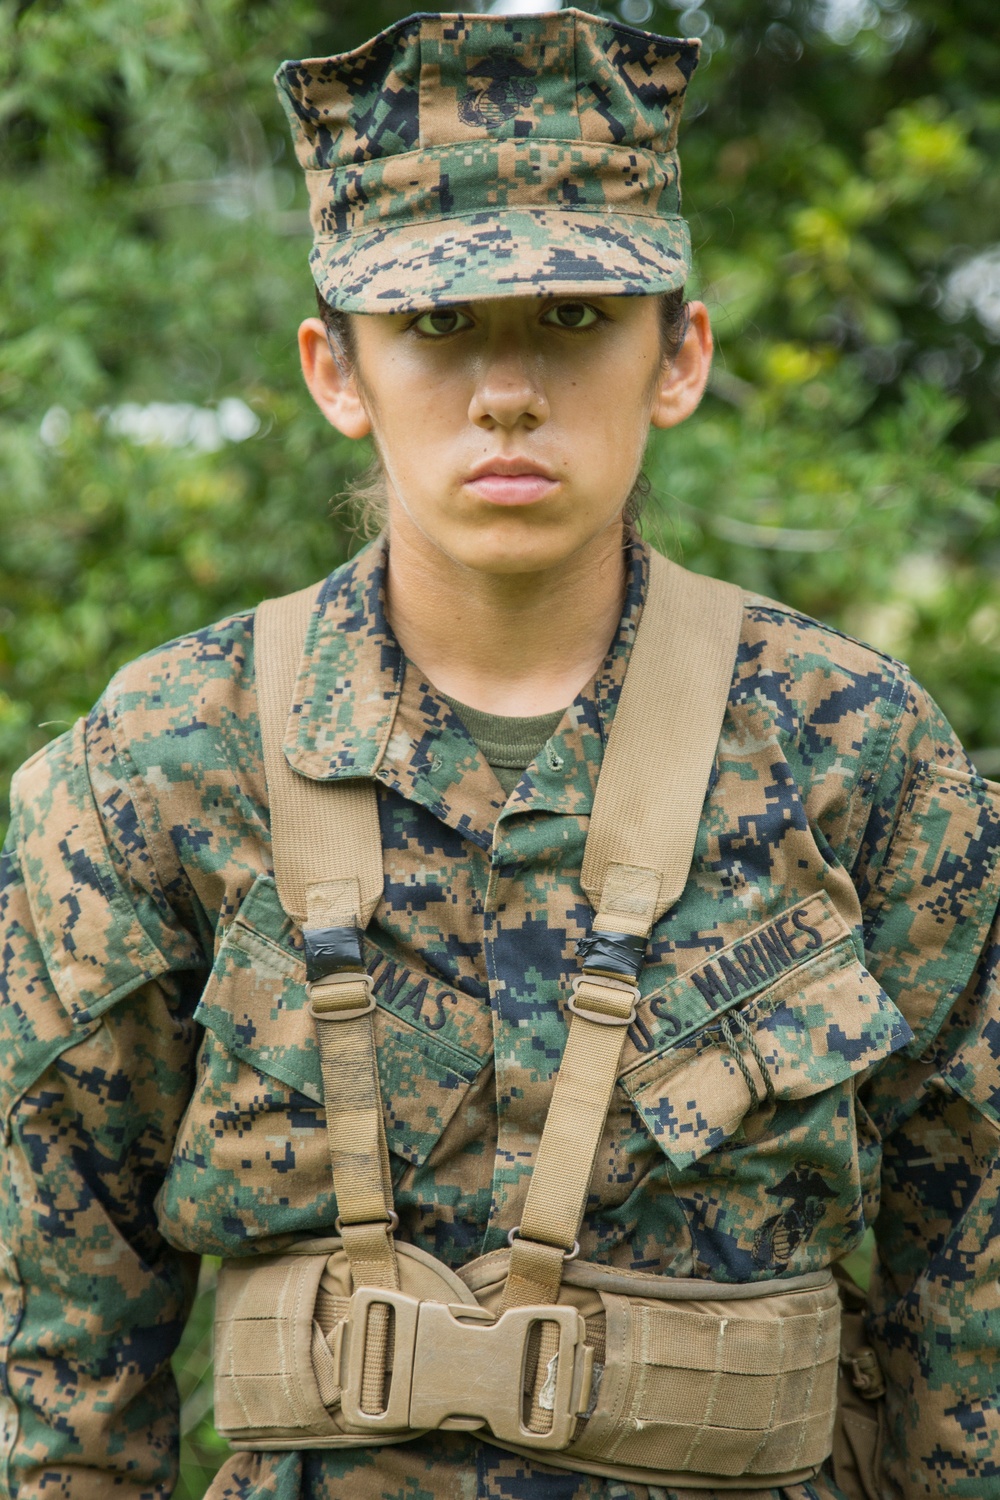 Annandale, Va., native training at Parris Island to become U.S. Marine